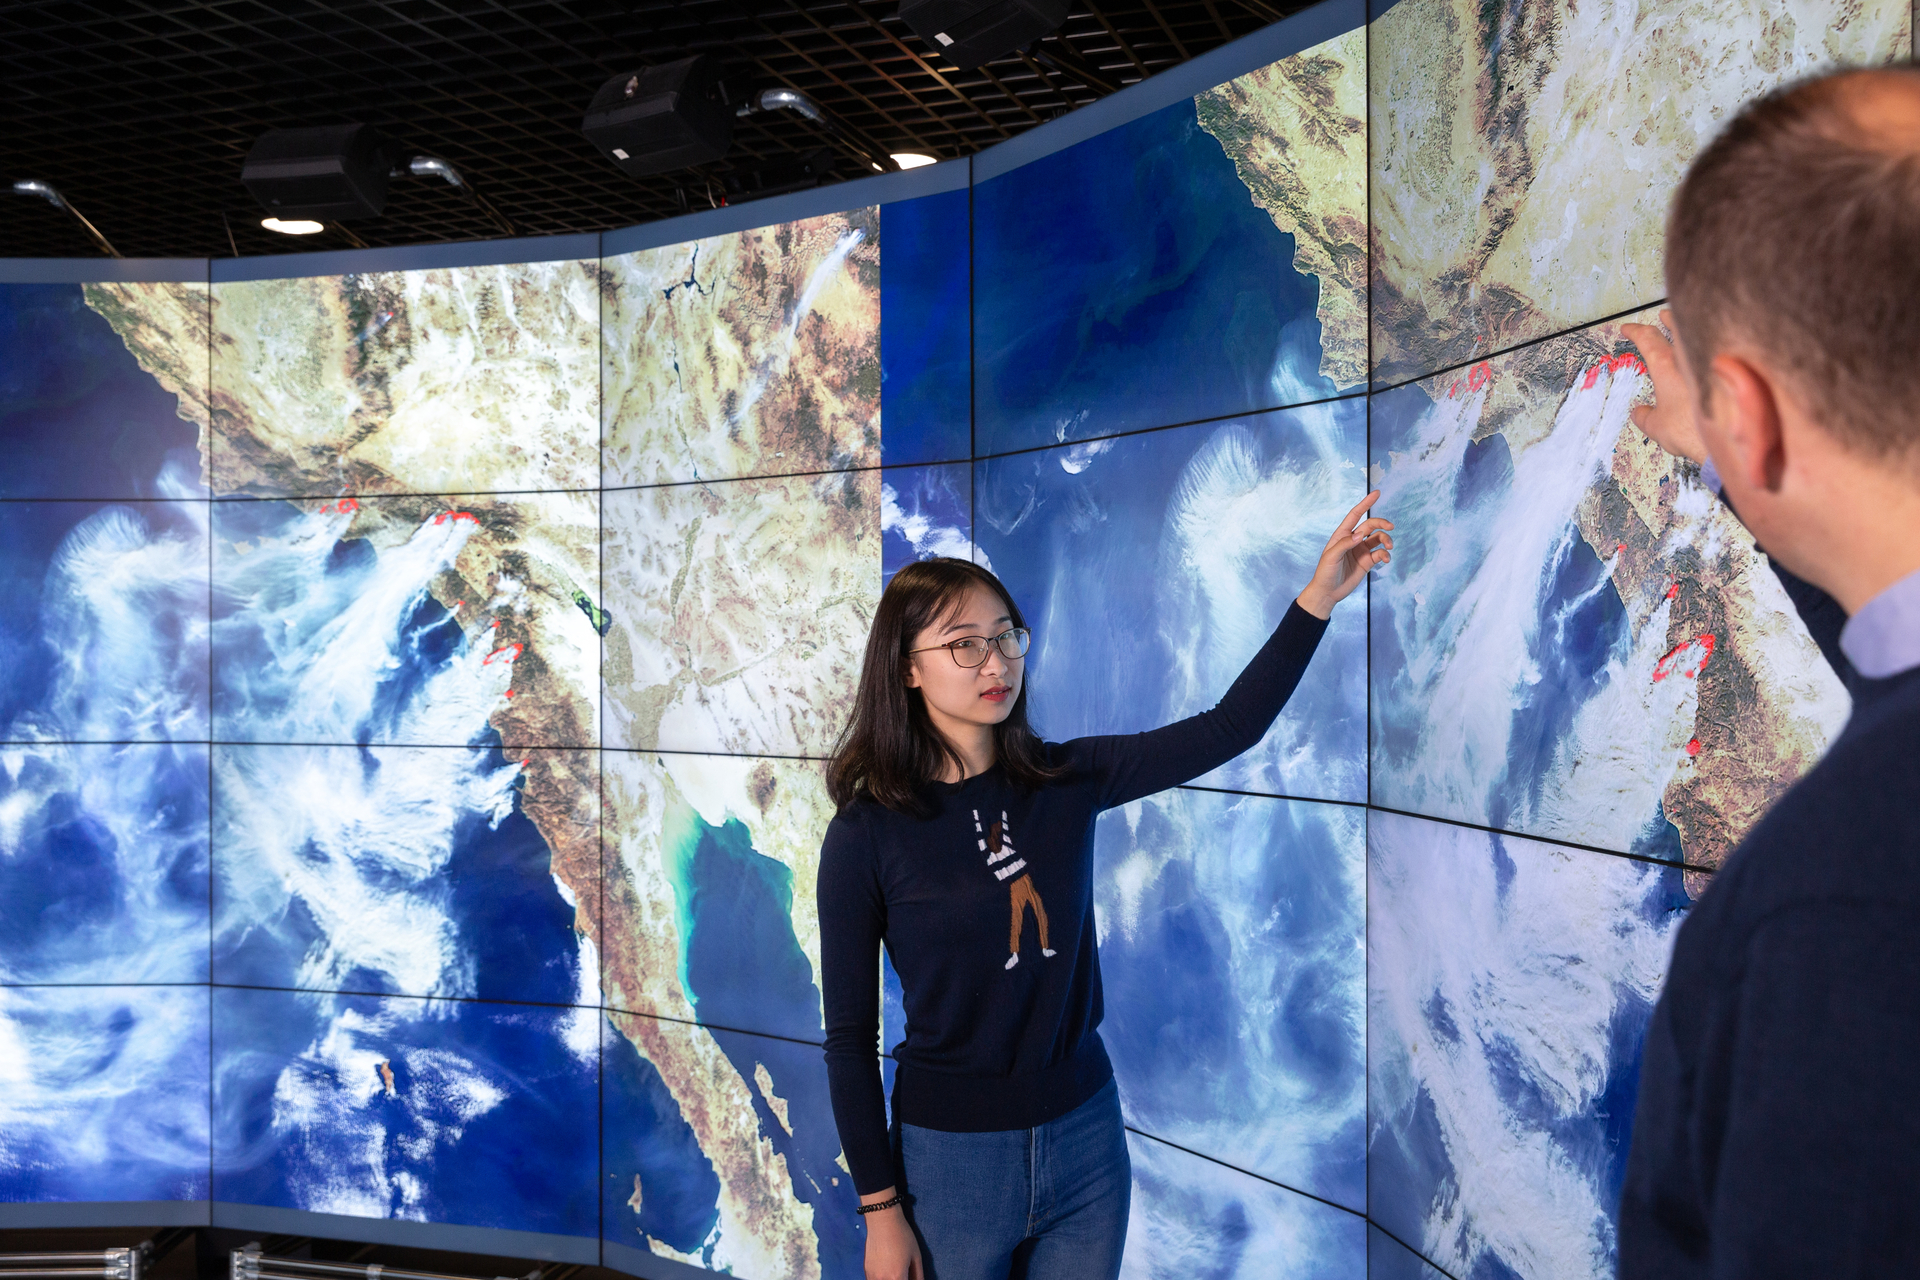 People pointing to large screen showing weather systems